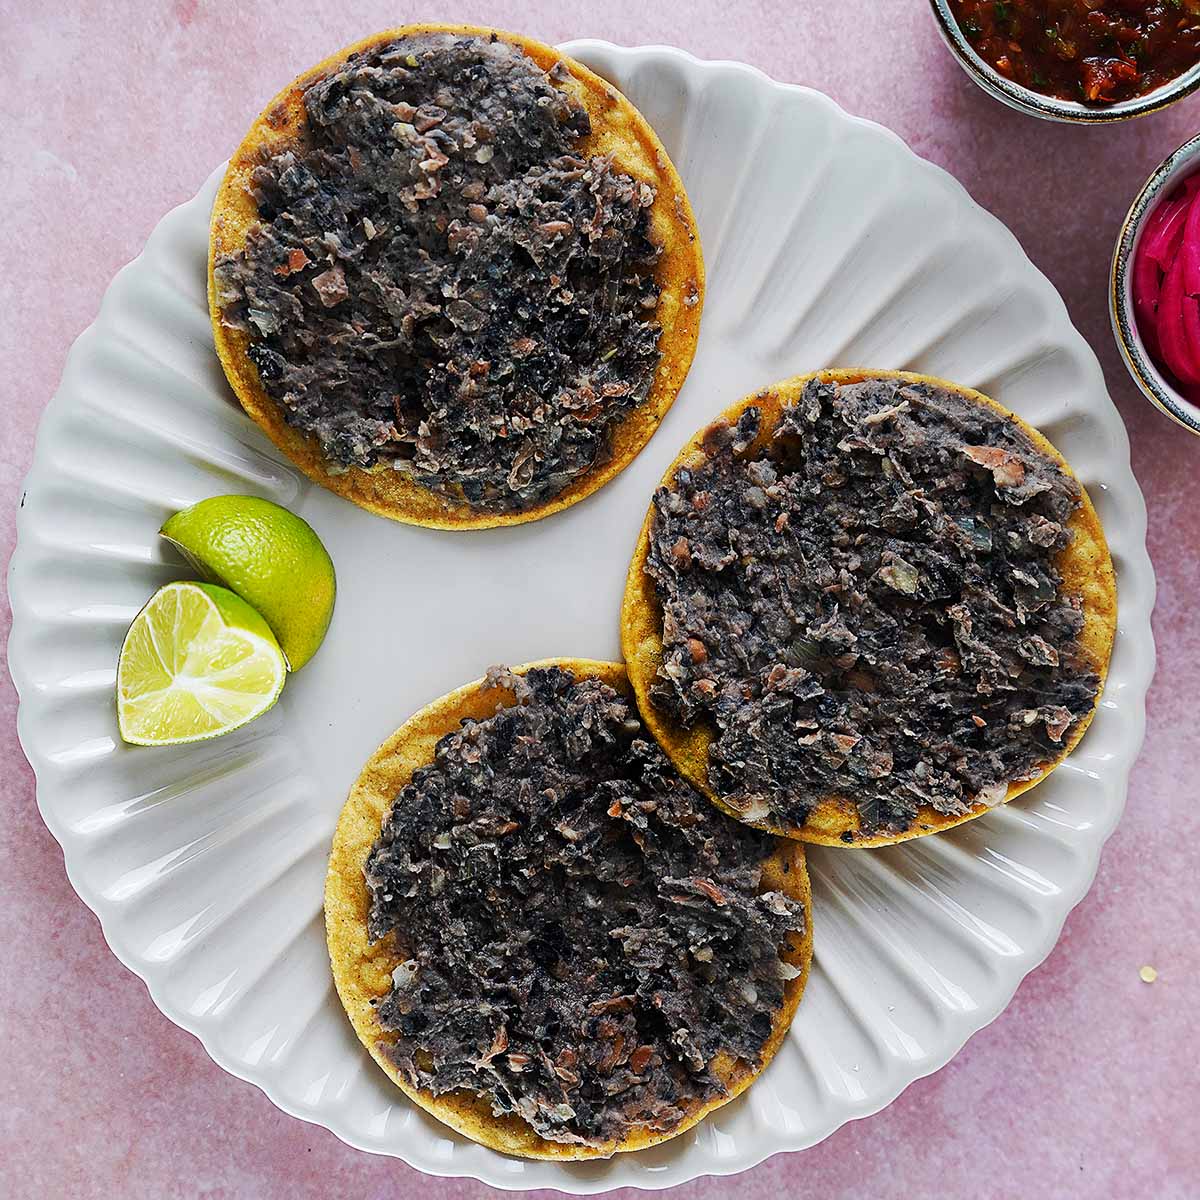 Three corn tostadas loaded with black beans.